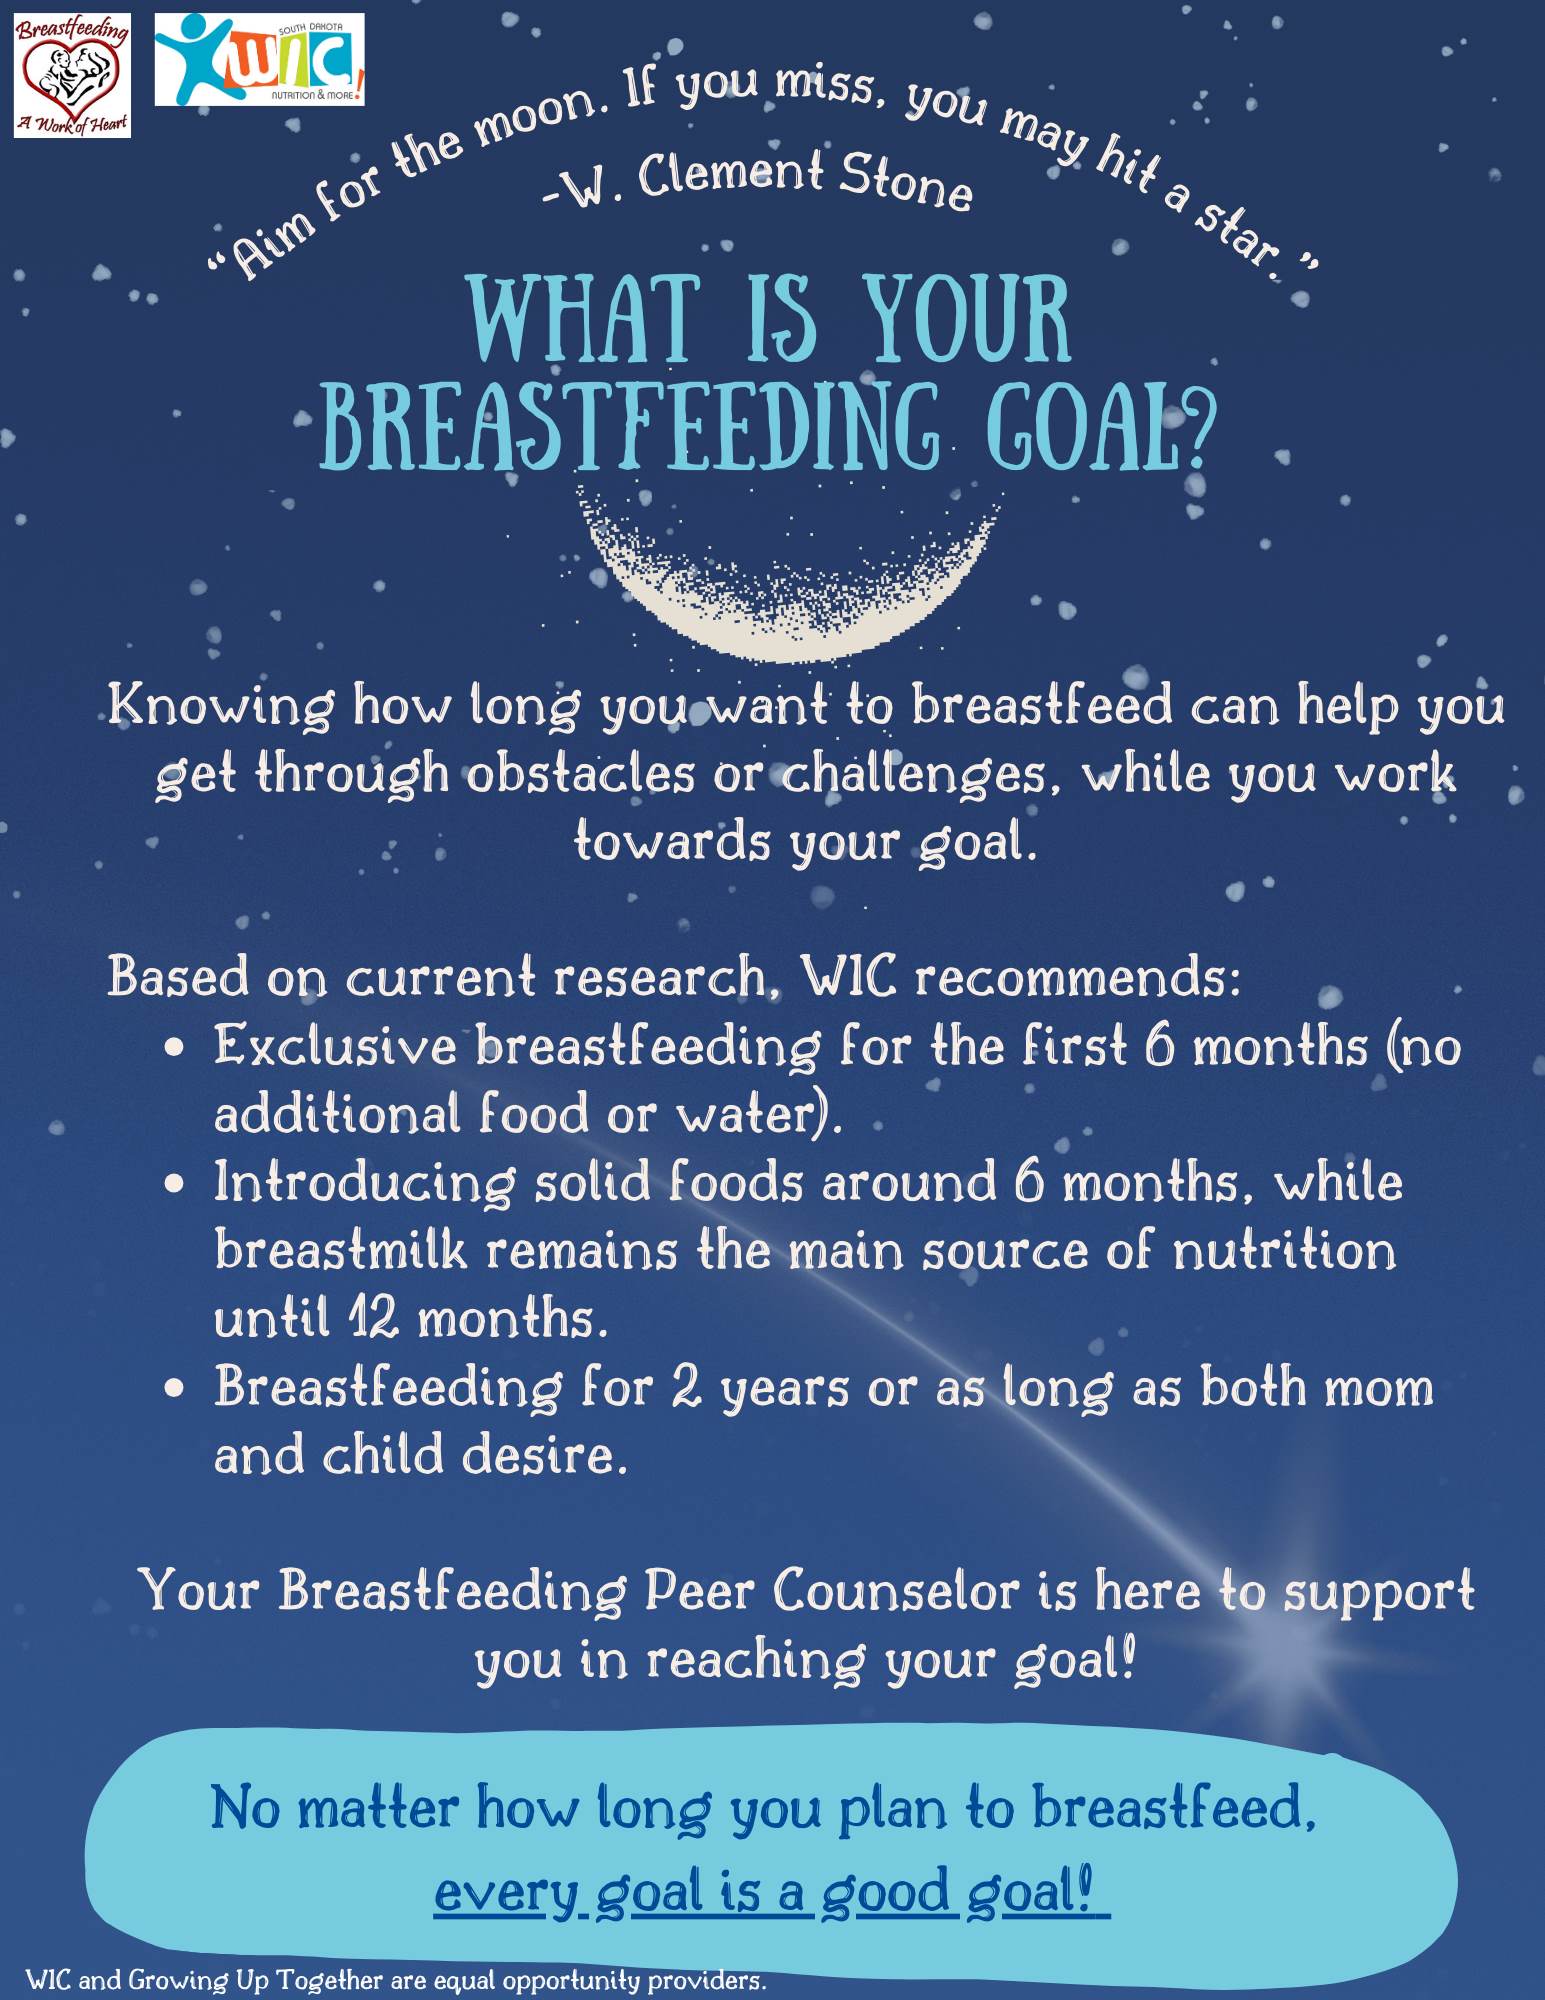 What is Your Breastfeeding Goal.jpg